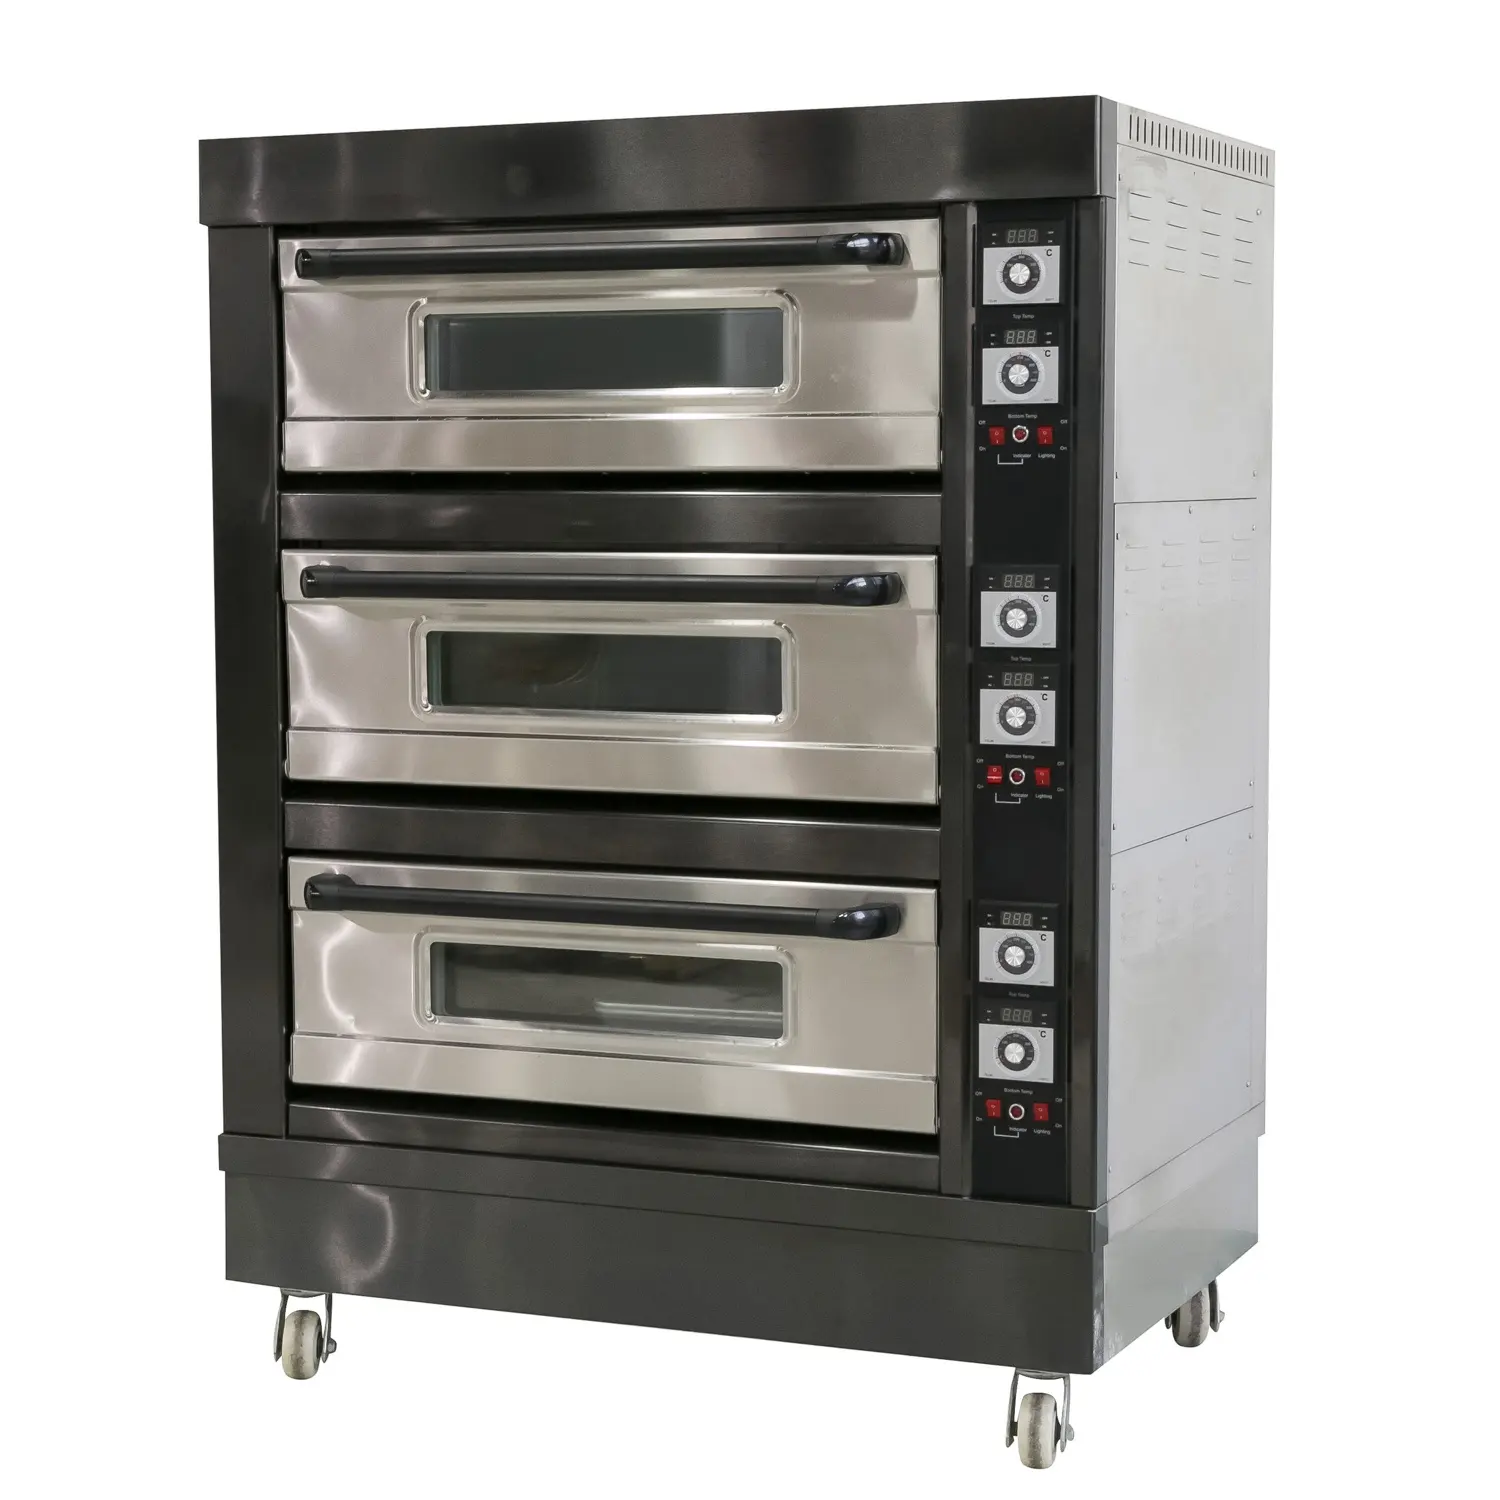 4 Deck 20 Trays Bread Oven Industrial Bakery Bread Pizza Biscuit Baking Oven For Sale